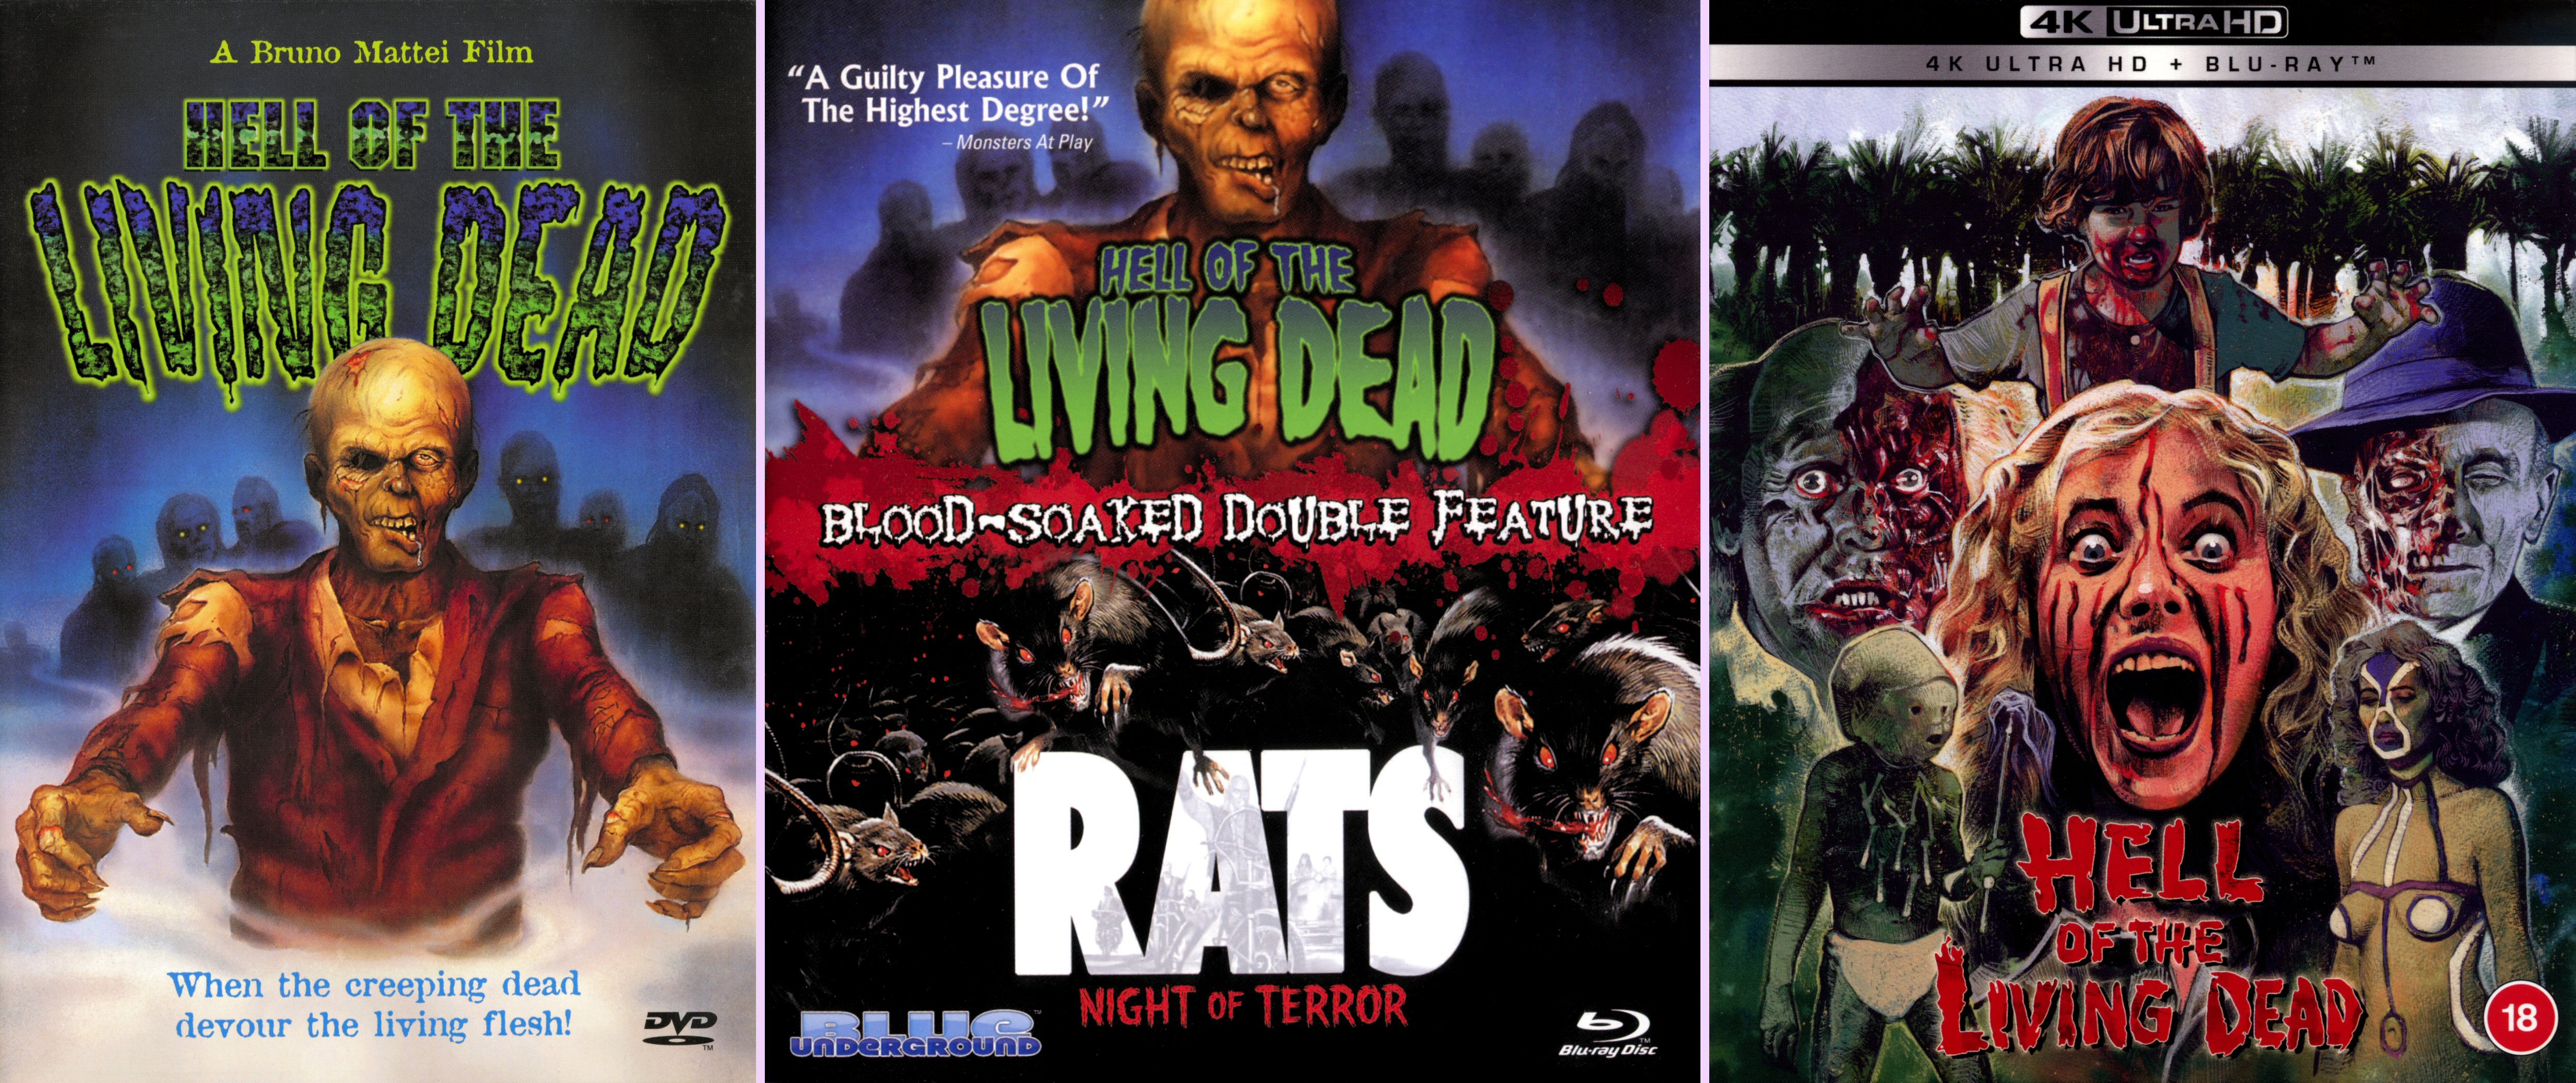 DVD Exotica Hell of the Living Dead Done Right pic